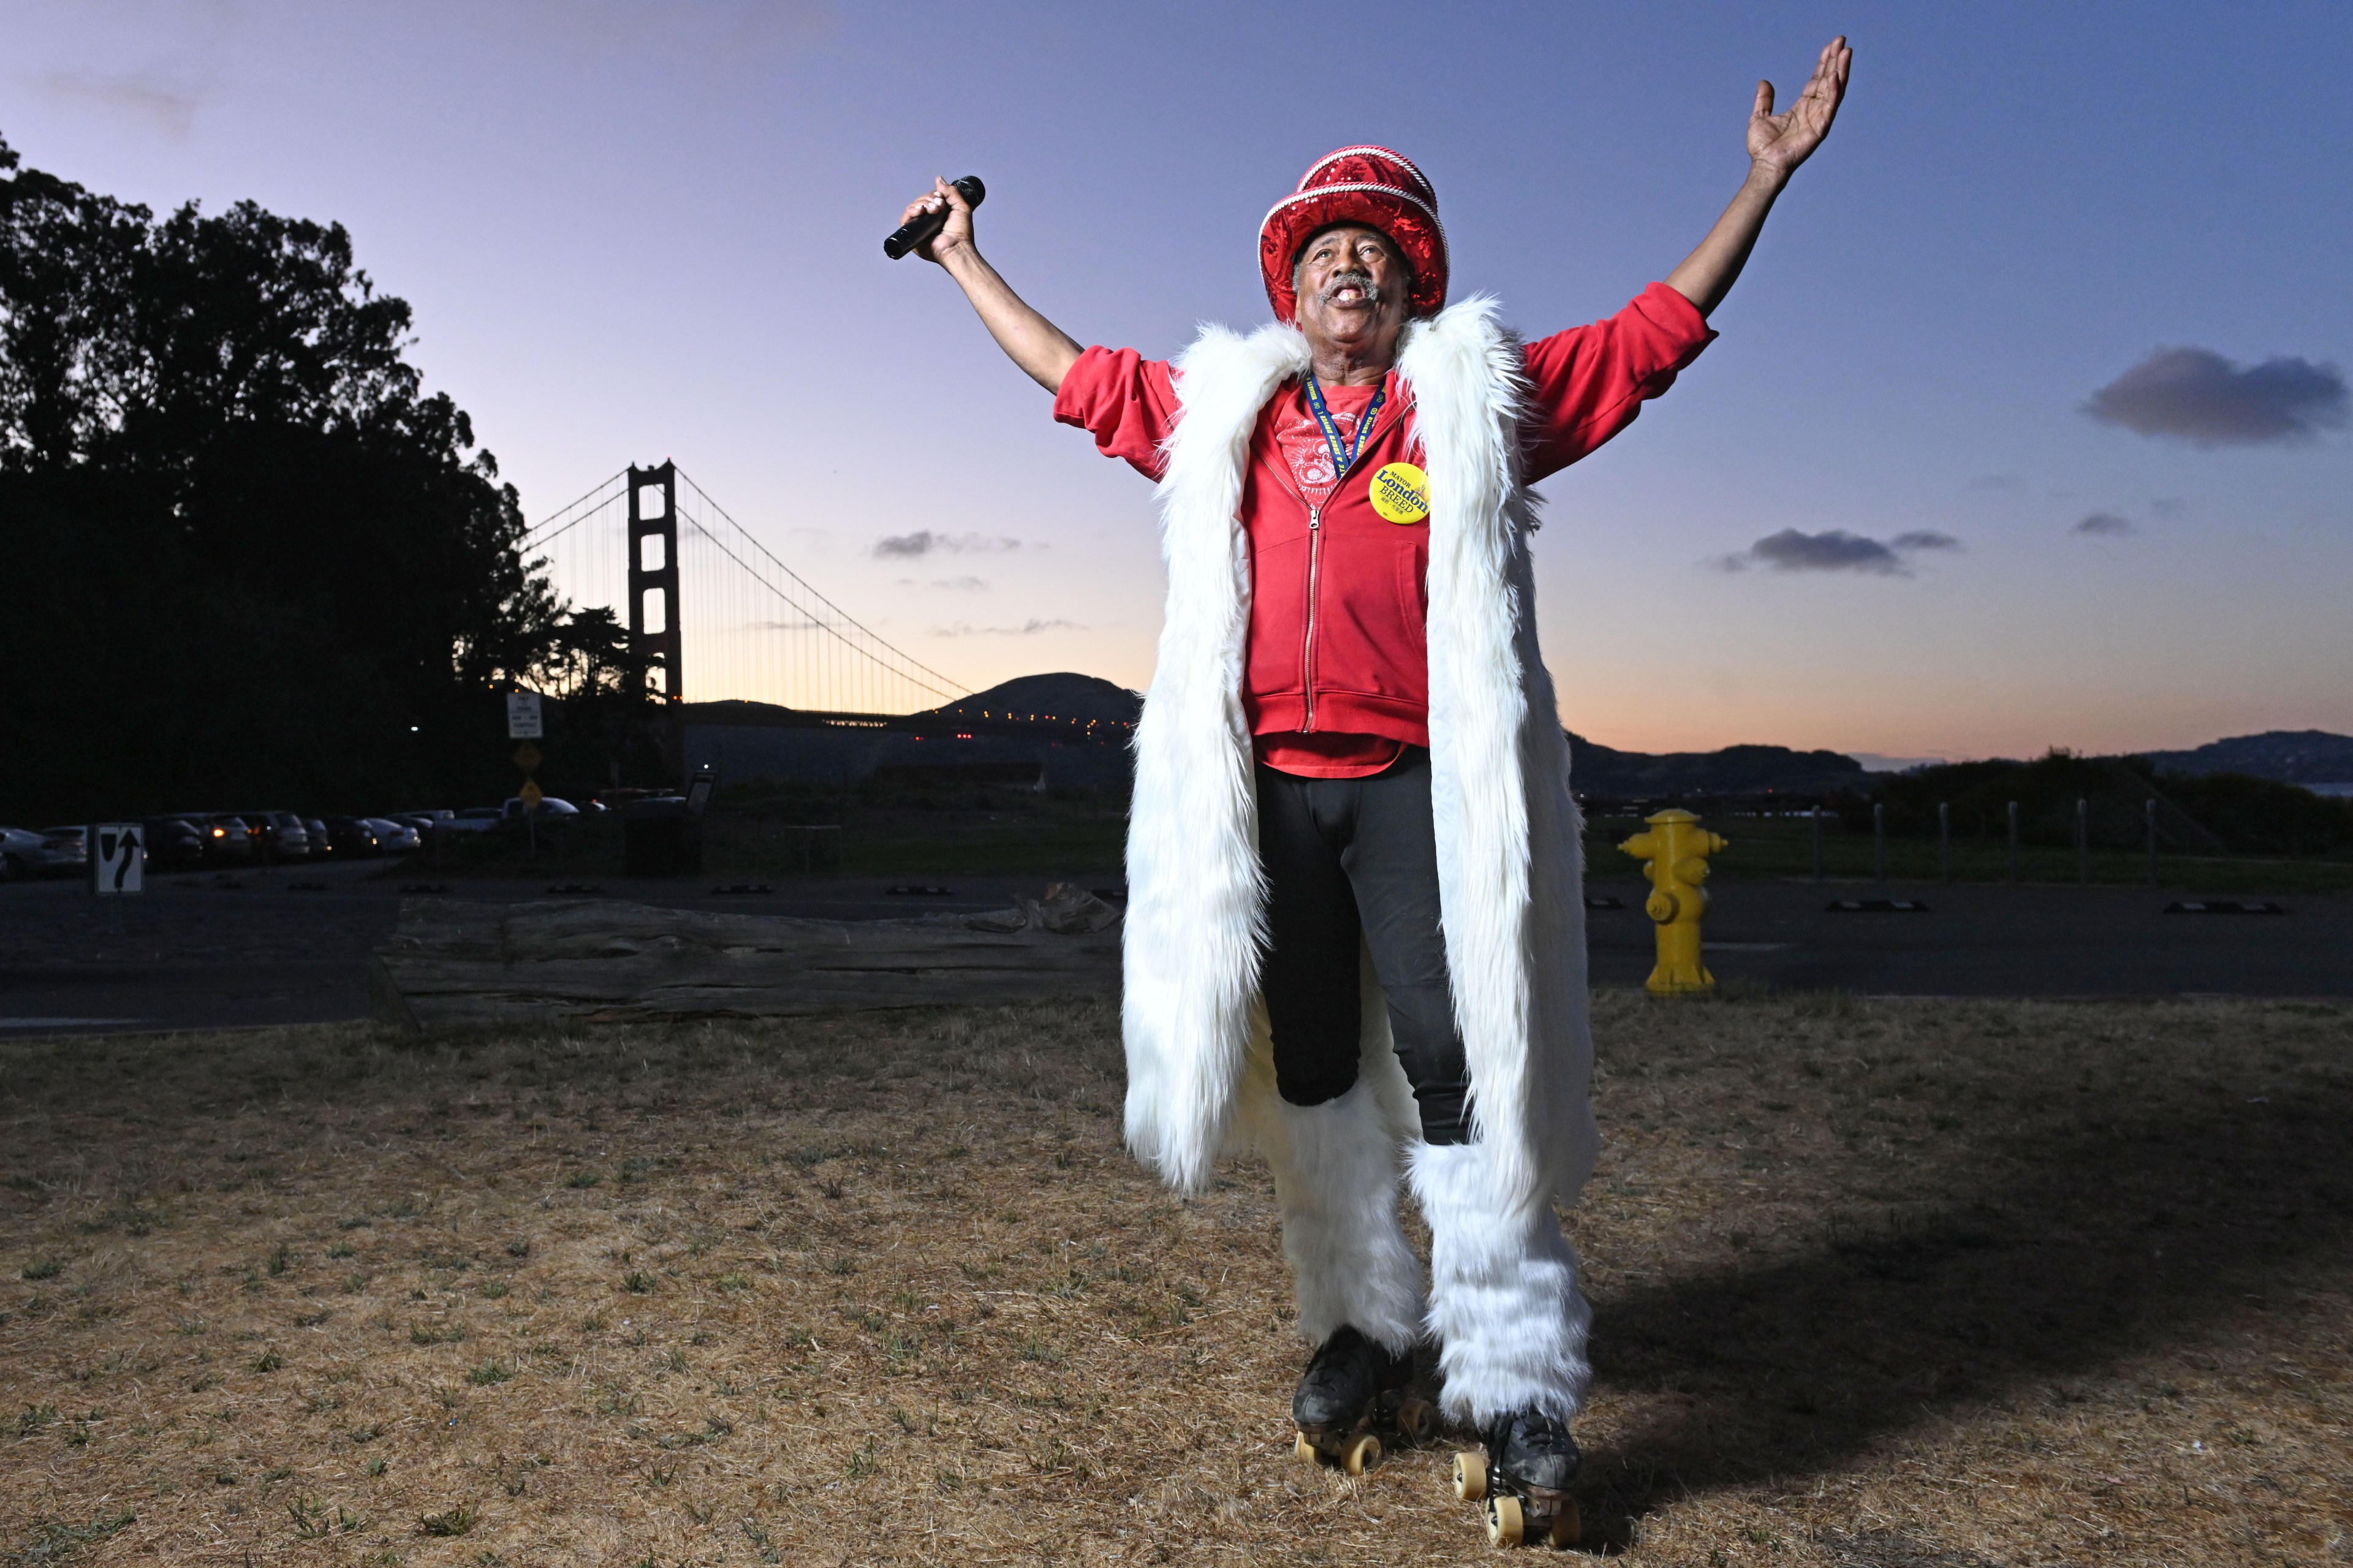 A person on roller skates, dressed in a red shirt, white furry long coat, and a red hat, is holding a microphone and raising their arms in front of the Golden Gate Bridge at dusk.